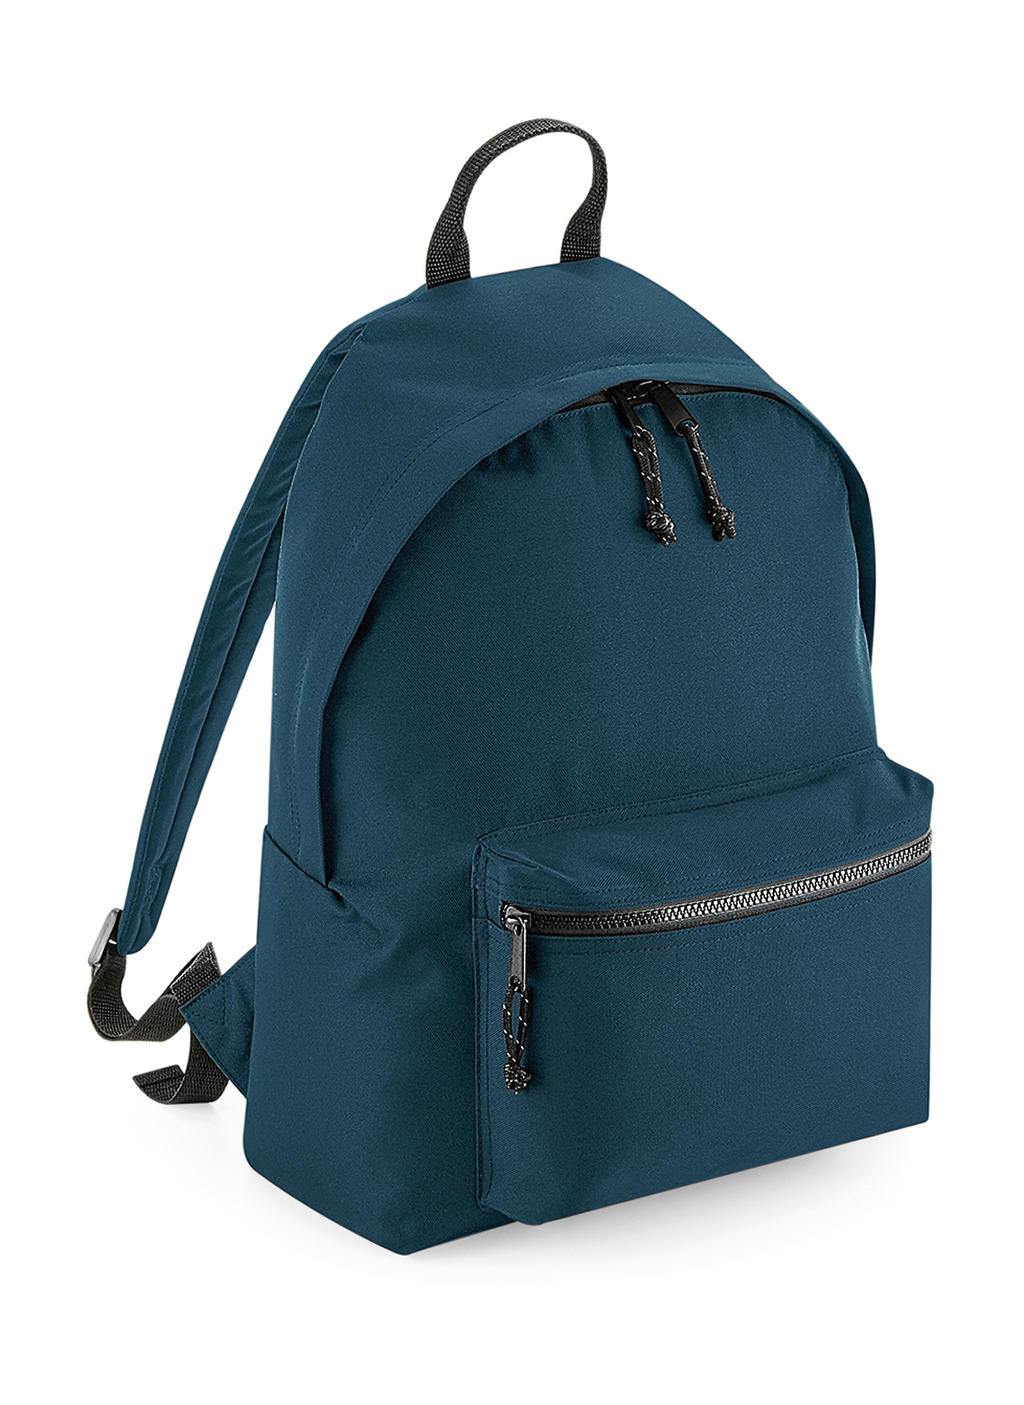  Recycled Backpack in Farbe Petrol